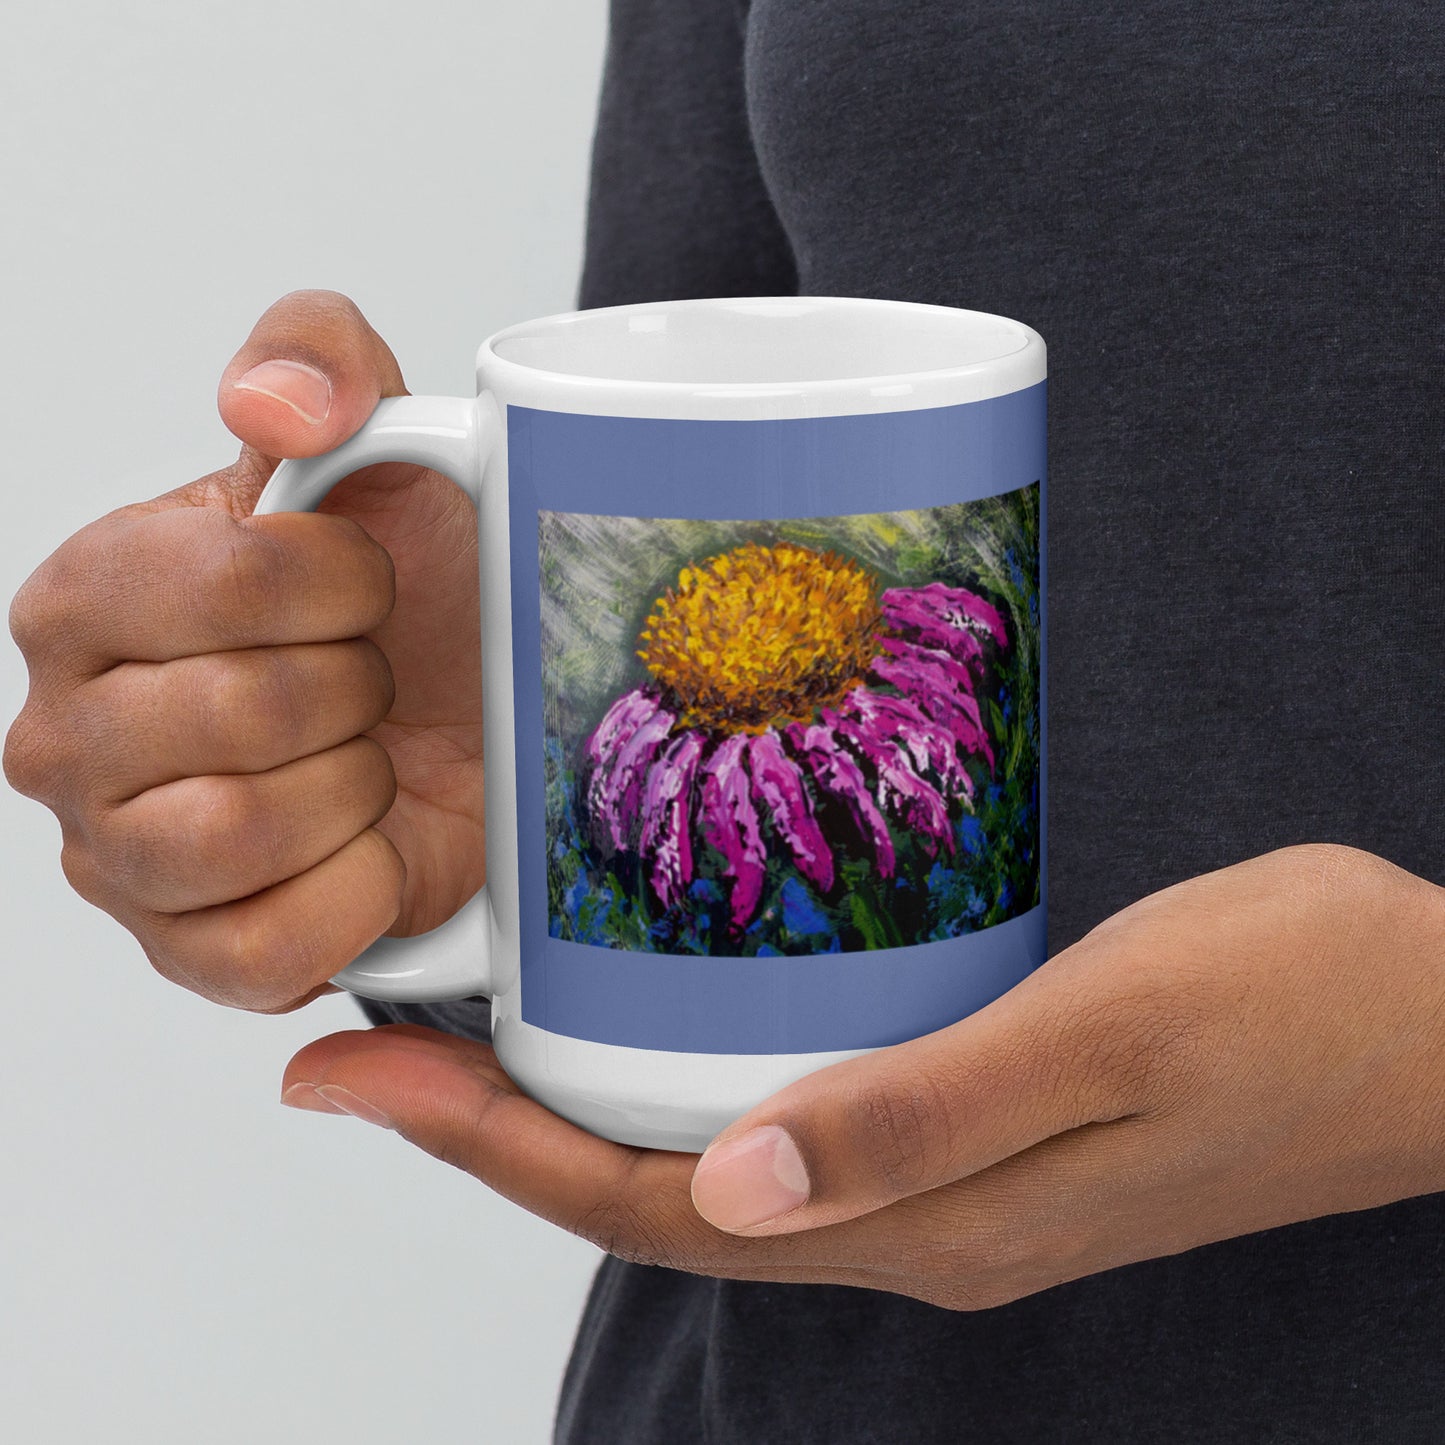 15oz. White glossy mug "Courage For the Journey"